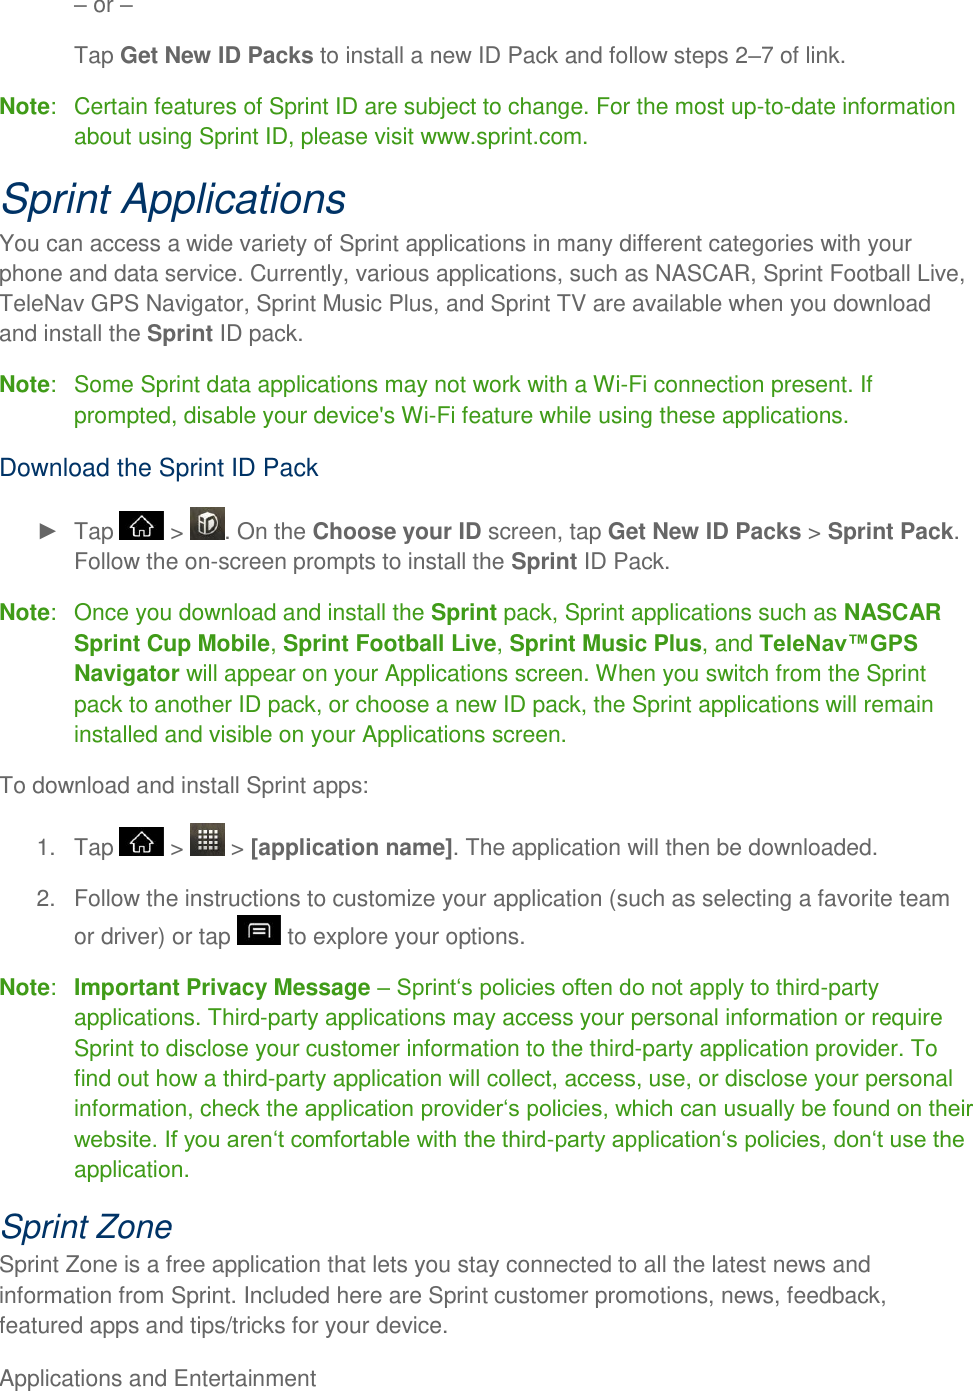 Applications and Entertainment      or  Tap Get New ID Packs to install a new ID Pack and follow steps 27 of link. Note:   Certain features of Sprint ID are subject to change. For the most up-to-date information about using Sprint ID, please visit www.sprint.com. Sprint Applications You can access a wide variety of Sprint applications in many different categories with your phone and data service. Currently, various applications, such as NASCAR, Sprint Football Live, TeleNav GPS Navigator, Sprint Music Plus, and Sprint TV are available when you download and install the Sprint ID pack. Note:   Some Sprint data applications may not work with a Wi-Fi connection present. If prompted, disable your device&apos;s Wi-Fi feature while using these applications. Download the Sprint ID Pack   Tap   &gt;  . On the Choose your ID screen, tap Get New ID Packs &gt; Sprint Pack. Follow the on-screen prompts to install the Sprint ID Pack. Note:   Once you download and install the Sprint pack, Sprint applications such as NASCAR Sprint Cup Mobile, Sprint Football Live, Sprint Music Plus, and TeleNav™GPS Navigator will appear on your Applications screen. When you switch from the Sprint pack to another ID pack, or choose a new ID pack, the Sprint applications will remain installed and visible on your Applications screen. To download and install Sprint apps: 1.  Tap   &gt;   &gt; [application name]. The application will then be downloaded. 2.  Follow the instructions to customize your application (such as selecting a favorite team or driver) or tap   to explore your options. Note:  Important Privacy Message  -party applications. Third-party applications may access your personal information or require Sprint to disclose your customer information to the third-party application provider. To find out how a third-party application will collect, access, use, or disclose your personal information, check the -application. Sprint Zone Sprint Zone is a free application that lets you stay connected to all the latest news and information from Sprint. Included here are Sprint customer promotions, news, feedback, featured apps and tips/tricks for your device. 